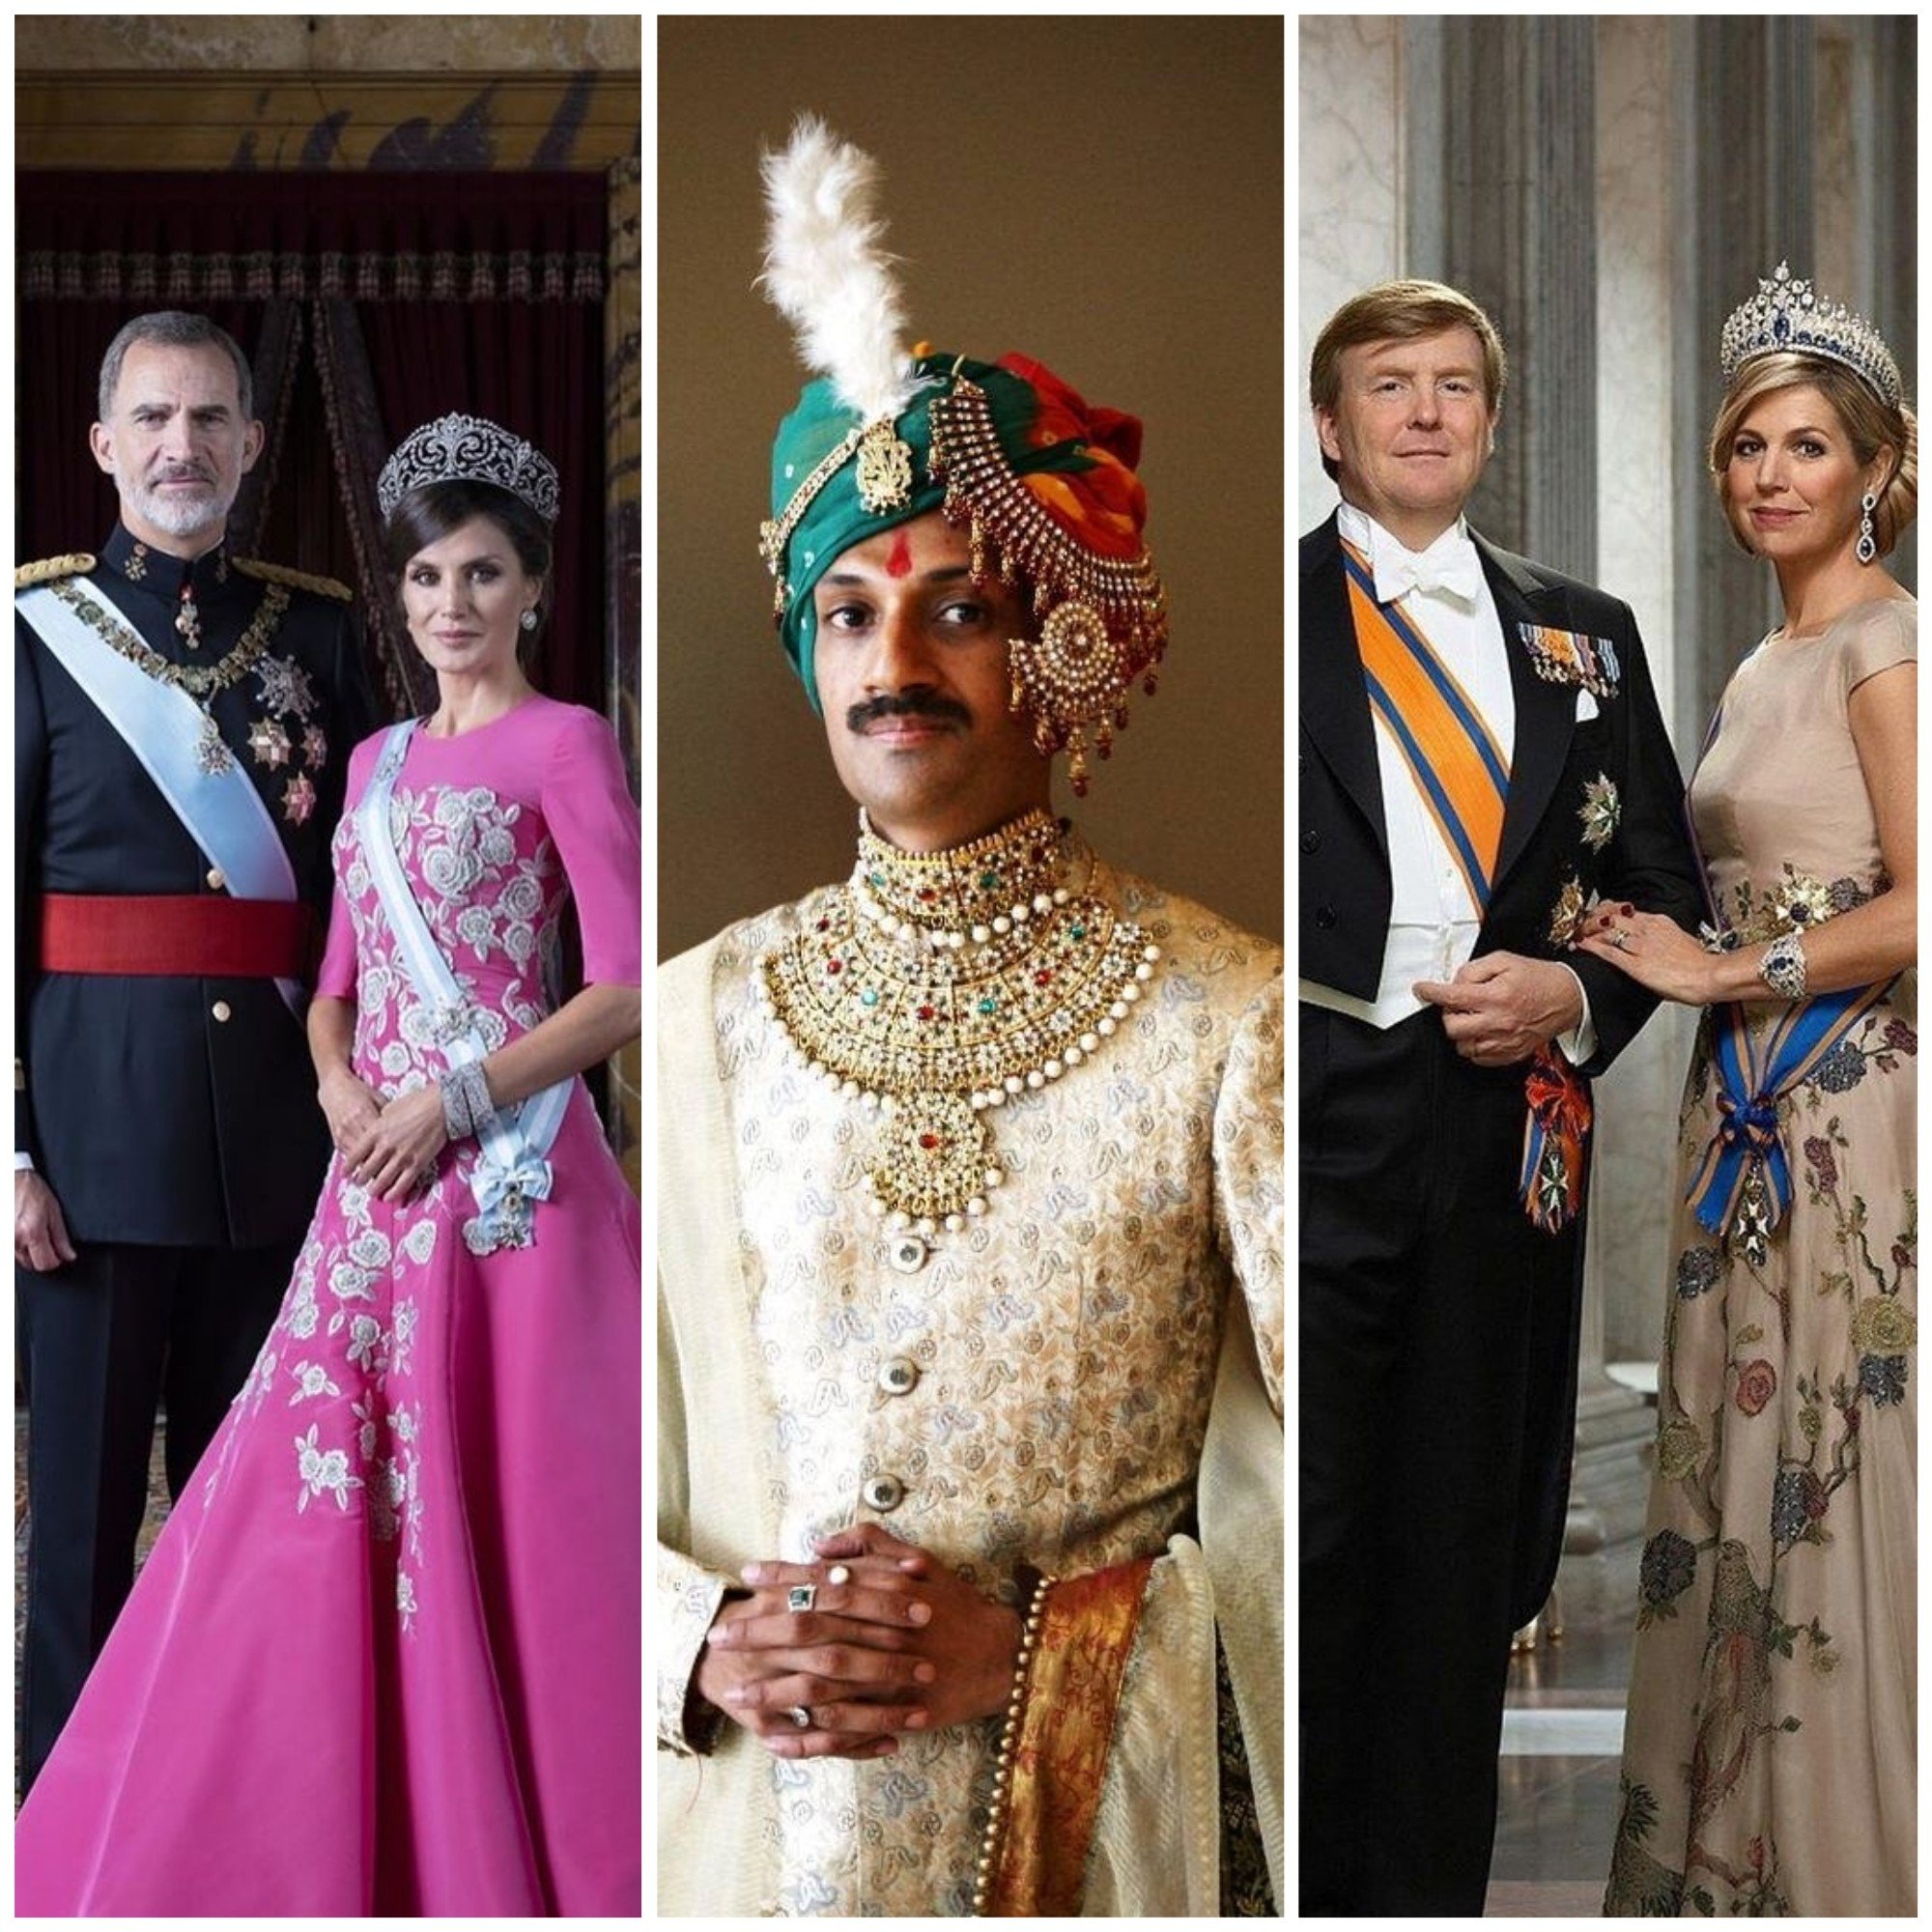 King Felipe VI and Queen Letizia of Spain, Prince Manvendra Singh Gohil of India, King Willem-Alexander and Queen Maxima of the Netherlands are some of the royals who have shown support for the LGBT community. Photo: Instagram